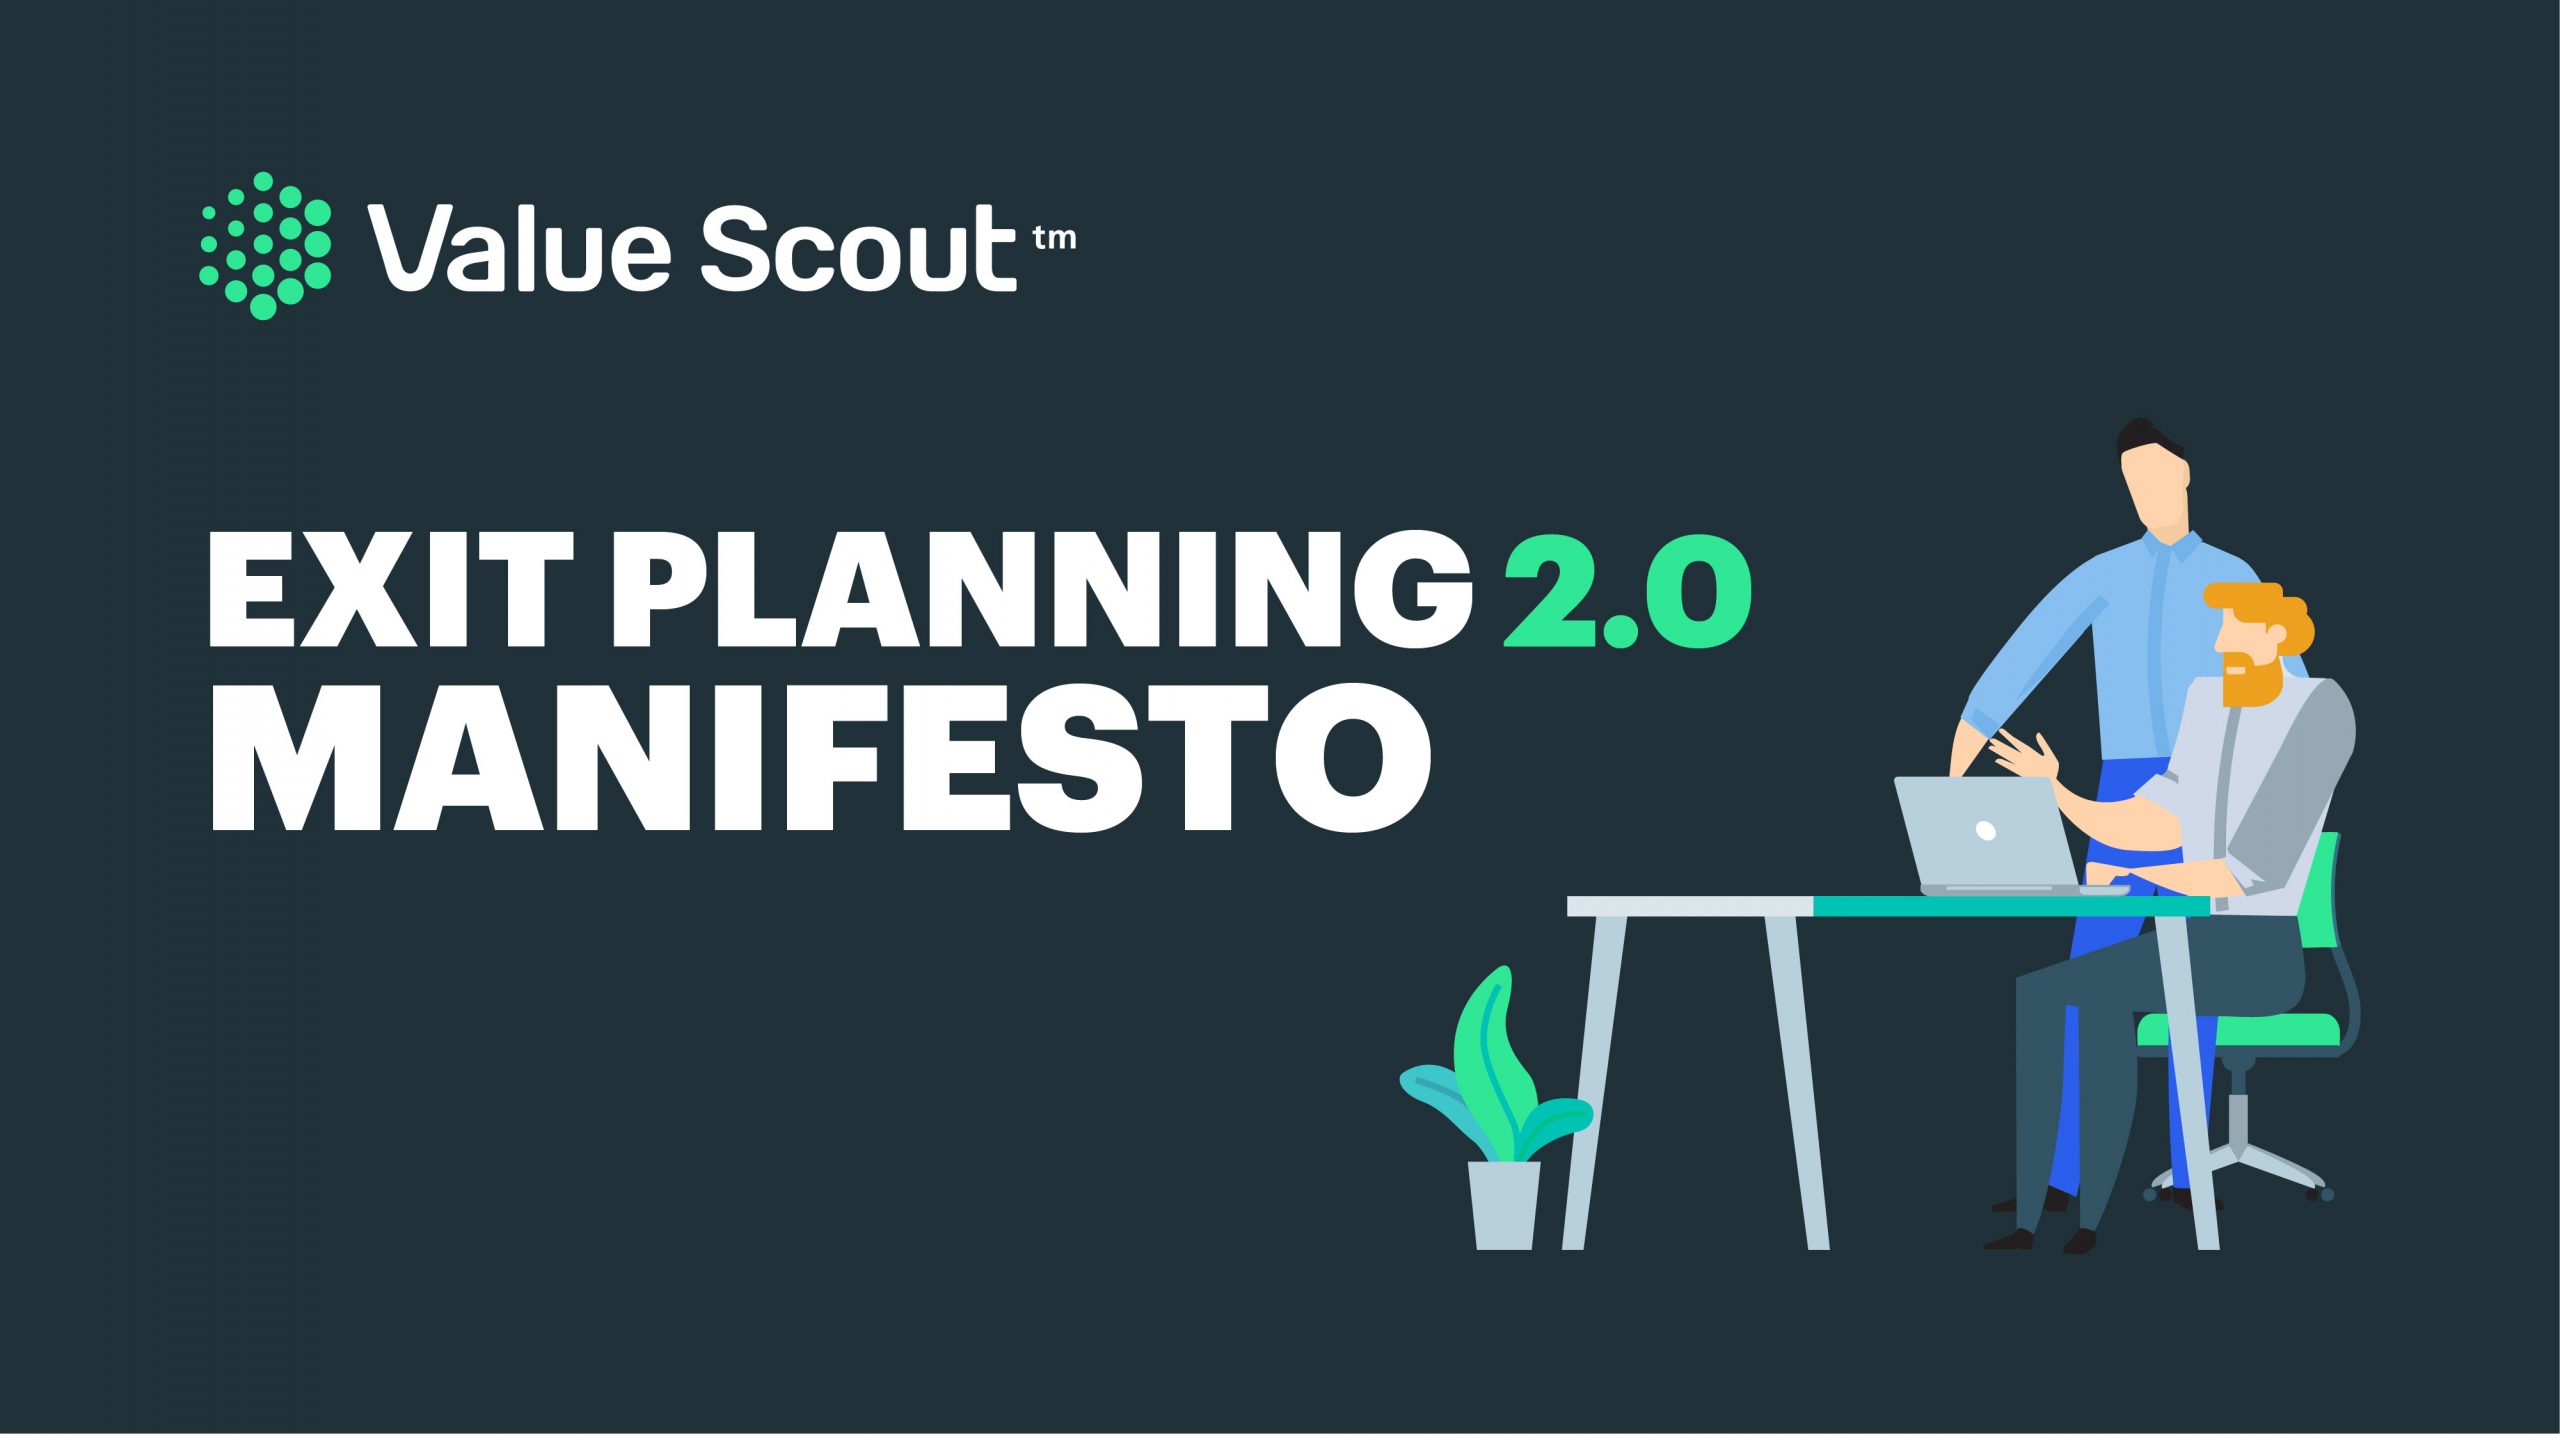 FY21_11_03_Value-Scout-EP-Manifesto-20-02-scaled.jpg